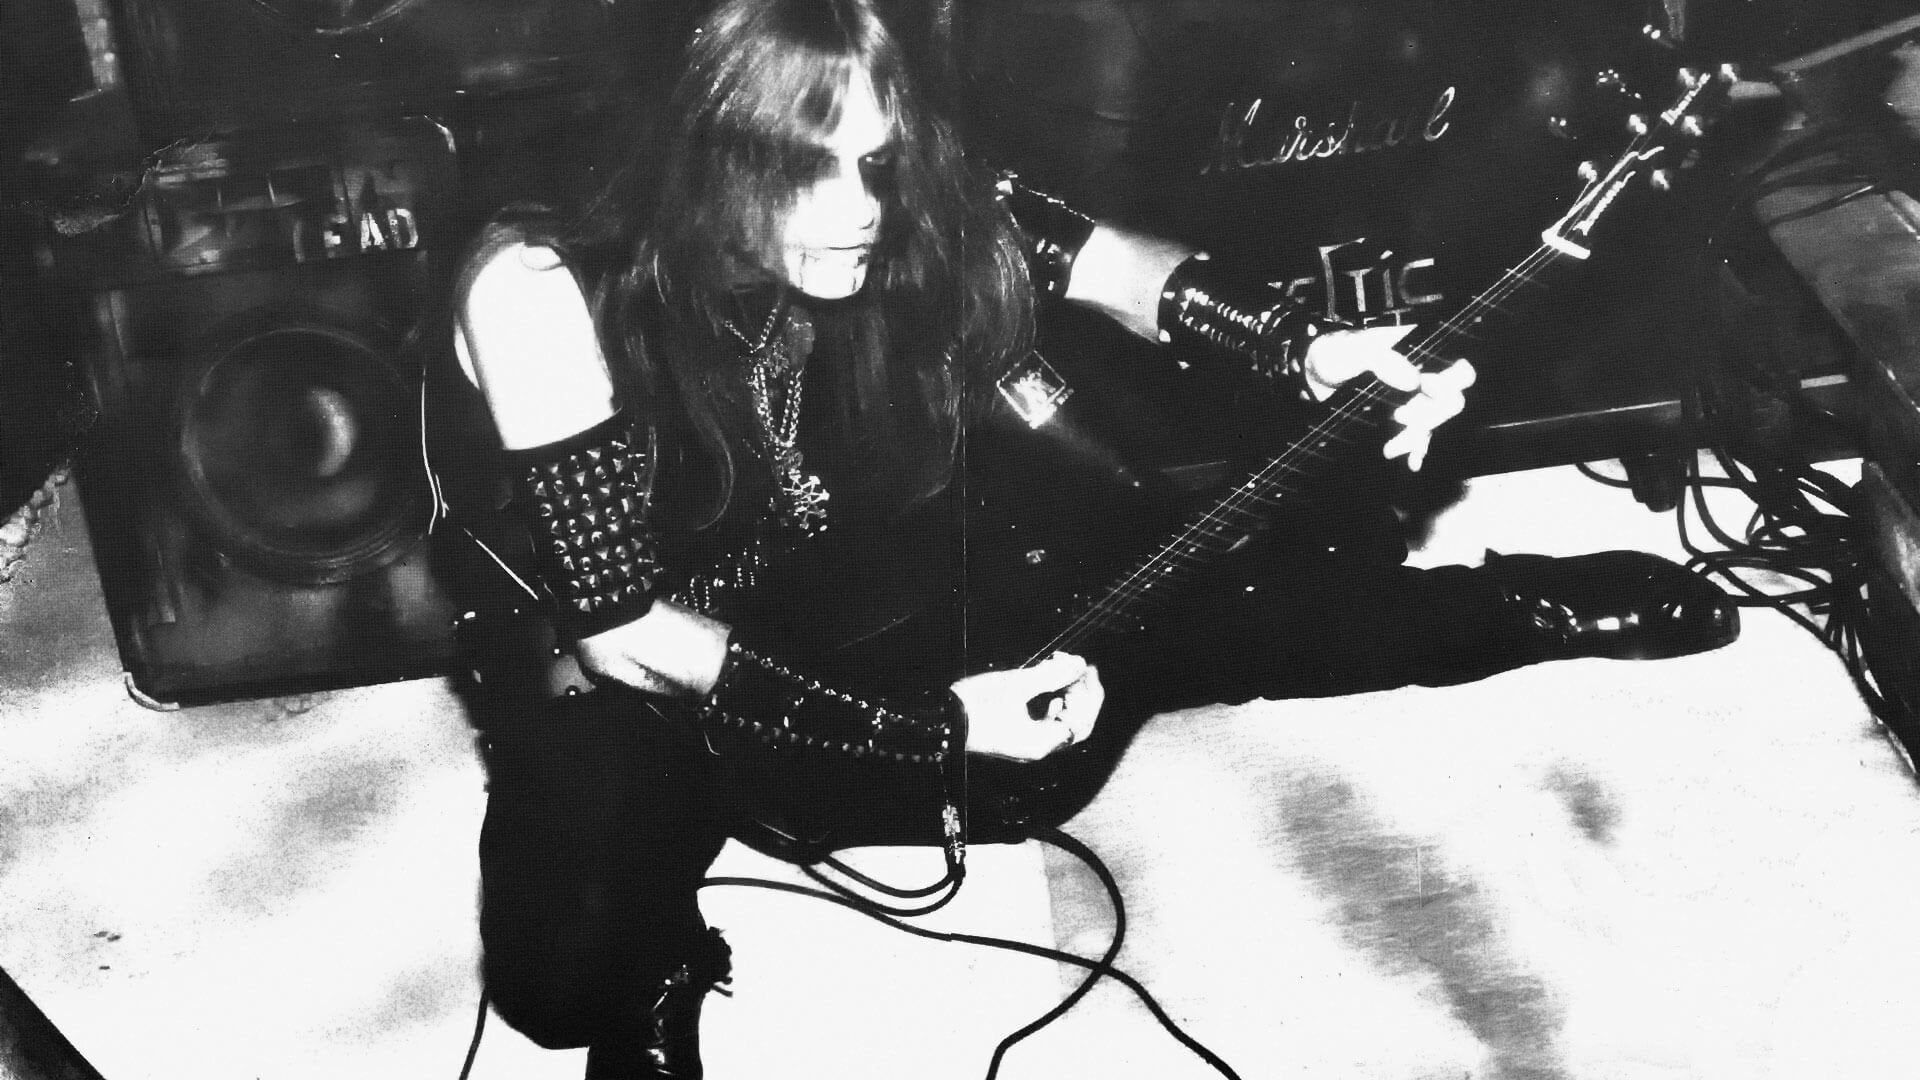 Visual Aggression Tom Warrior of Celtic Frost, 1984